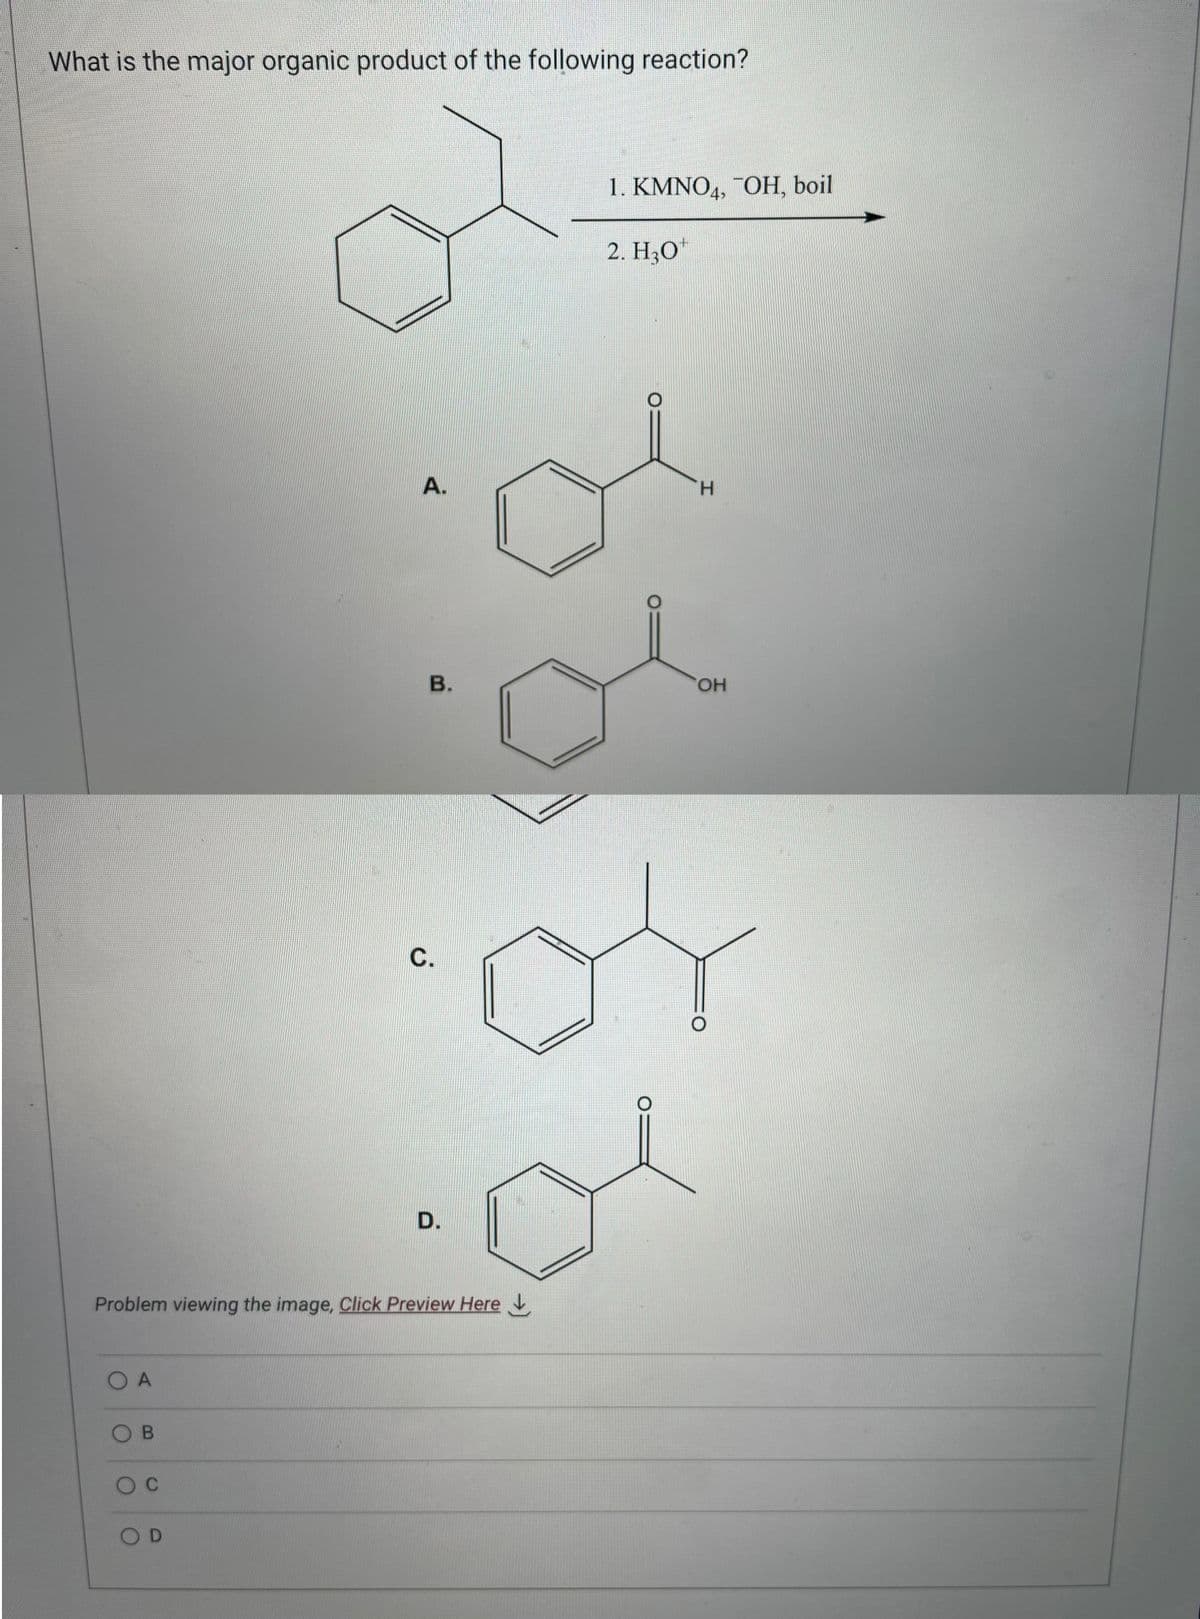 What is the major organic product of the following reaction?
OA
OB
O C
A.
Problem viewing the image. Click Preview Here
OD
B.
C.
D.
1. KMNO4, "OH, boil
2. H3O+
H
OH